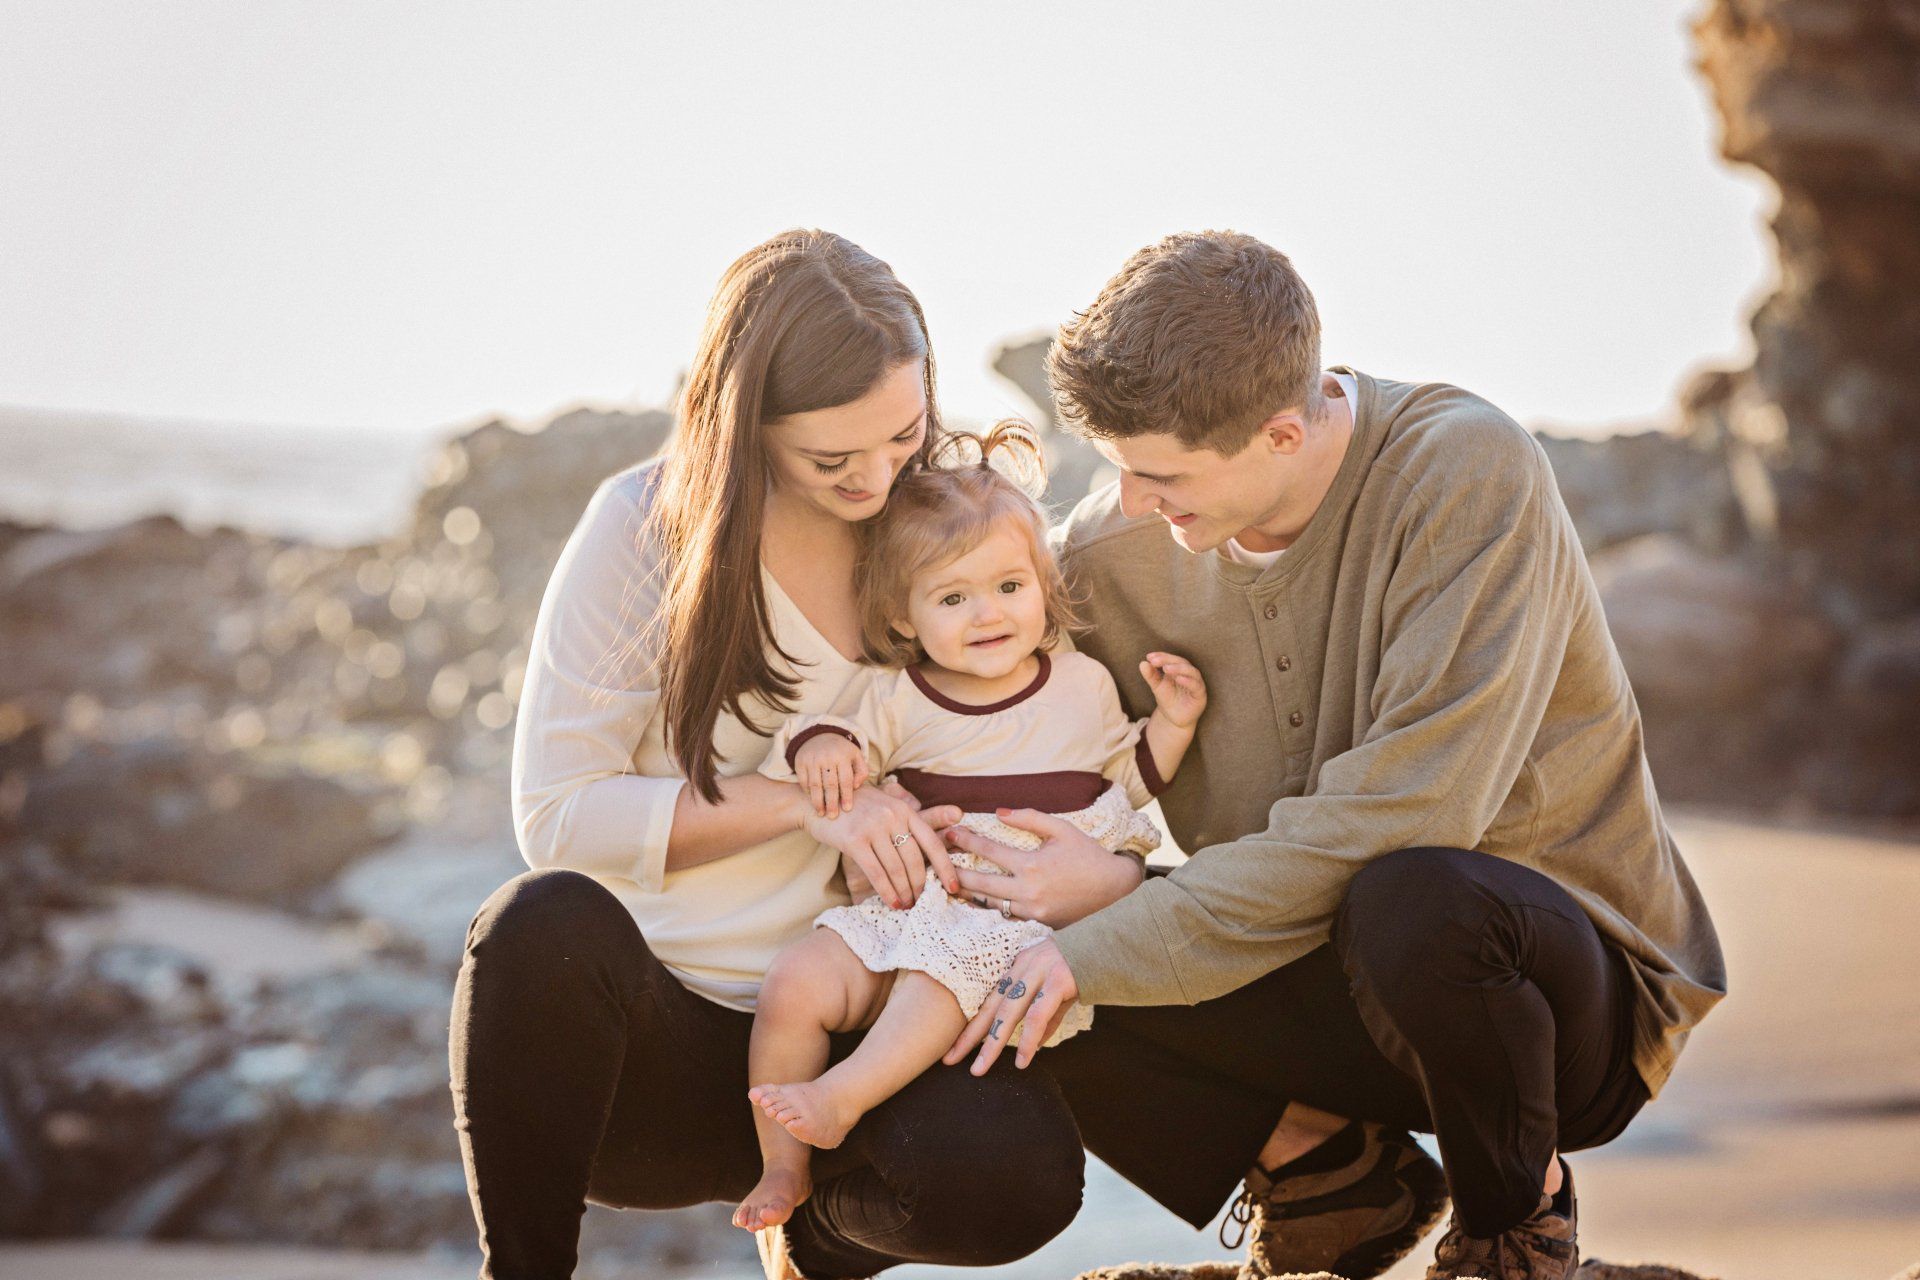 Family photography session in Laguna Beach with a one year old baby.  Family wearing neutral colors to compliment the beach background.